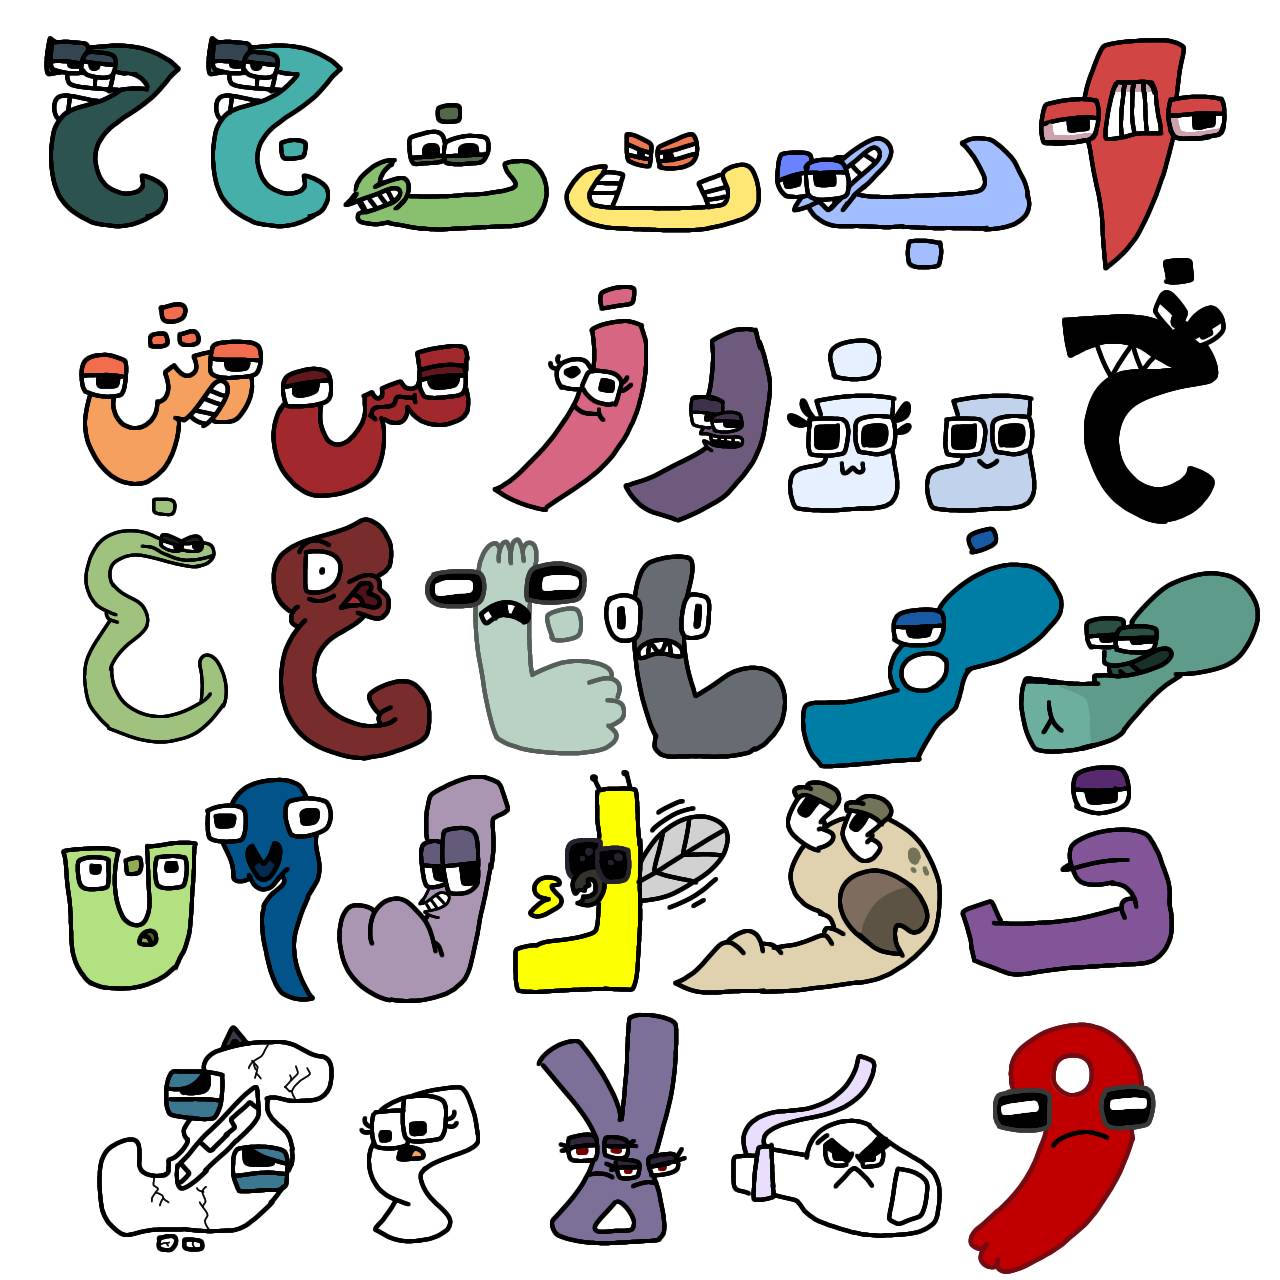 New Alphabet Lore But Everyone Is D (Full Version) 